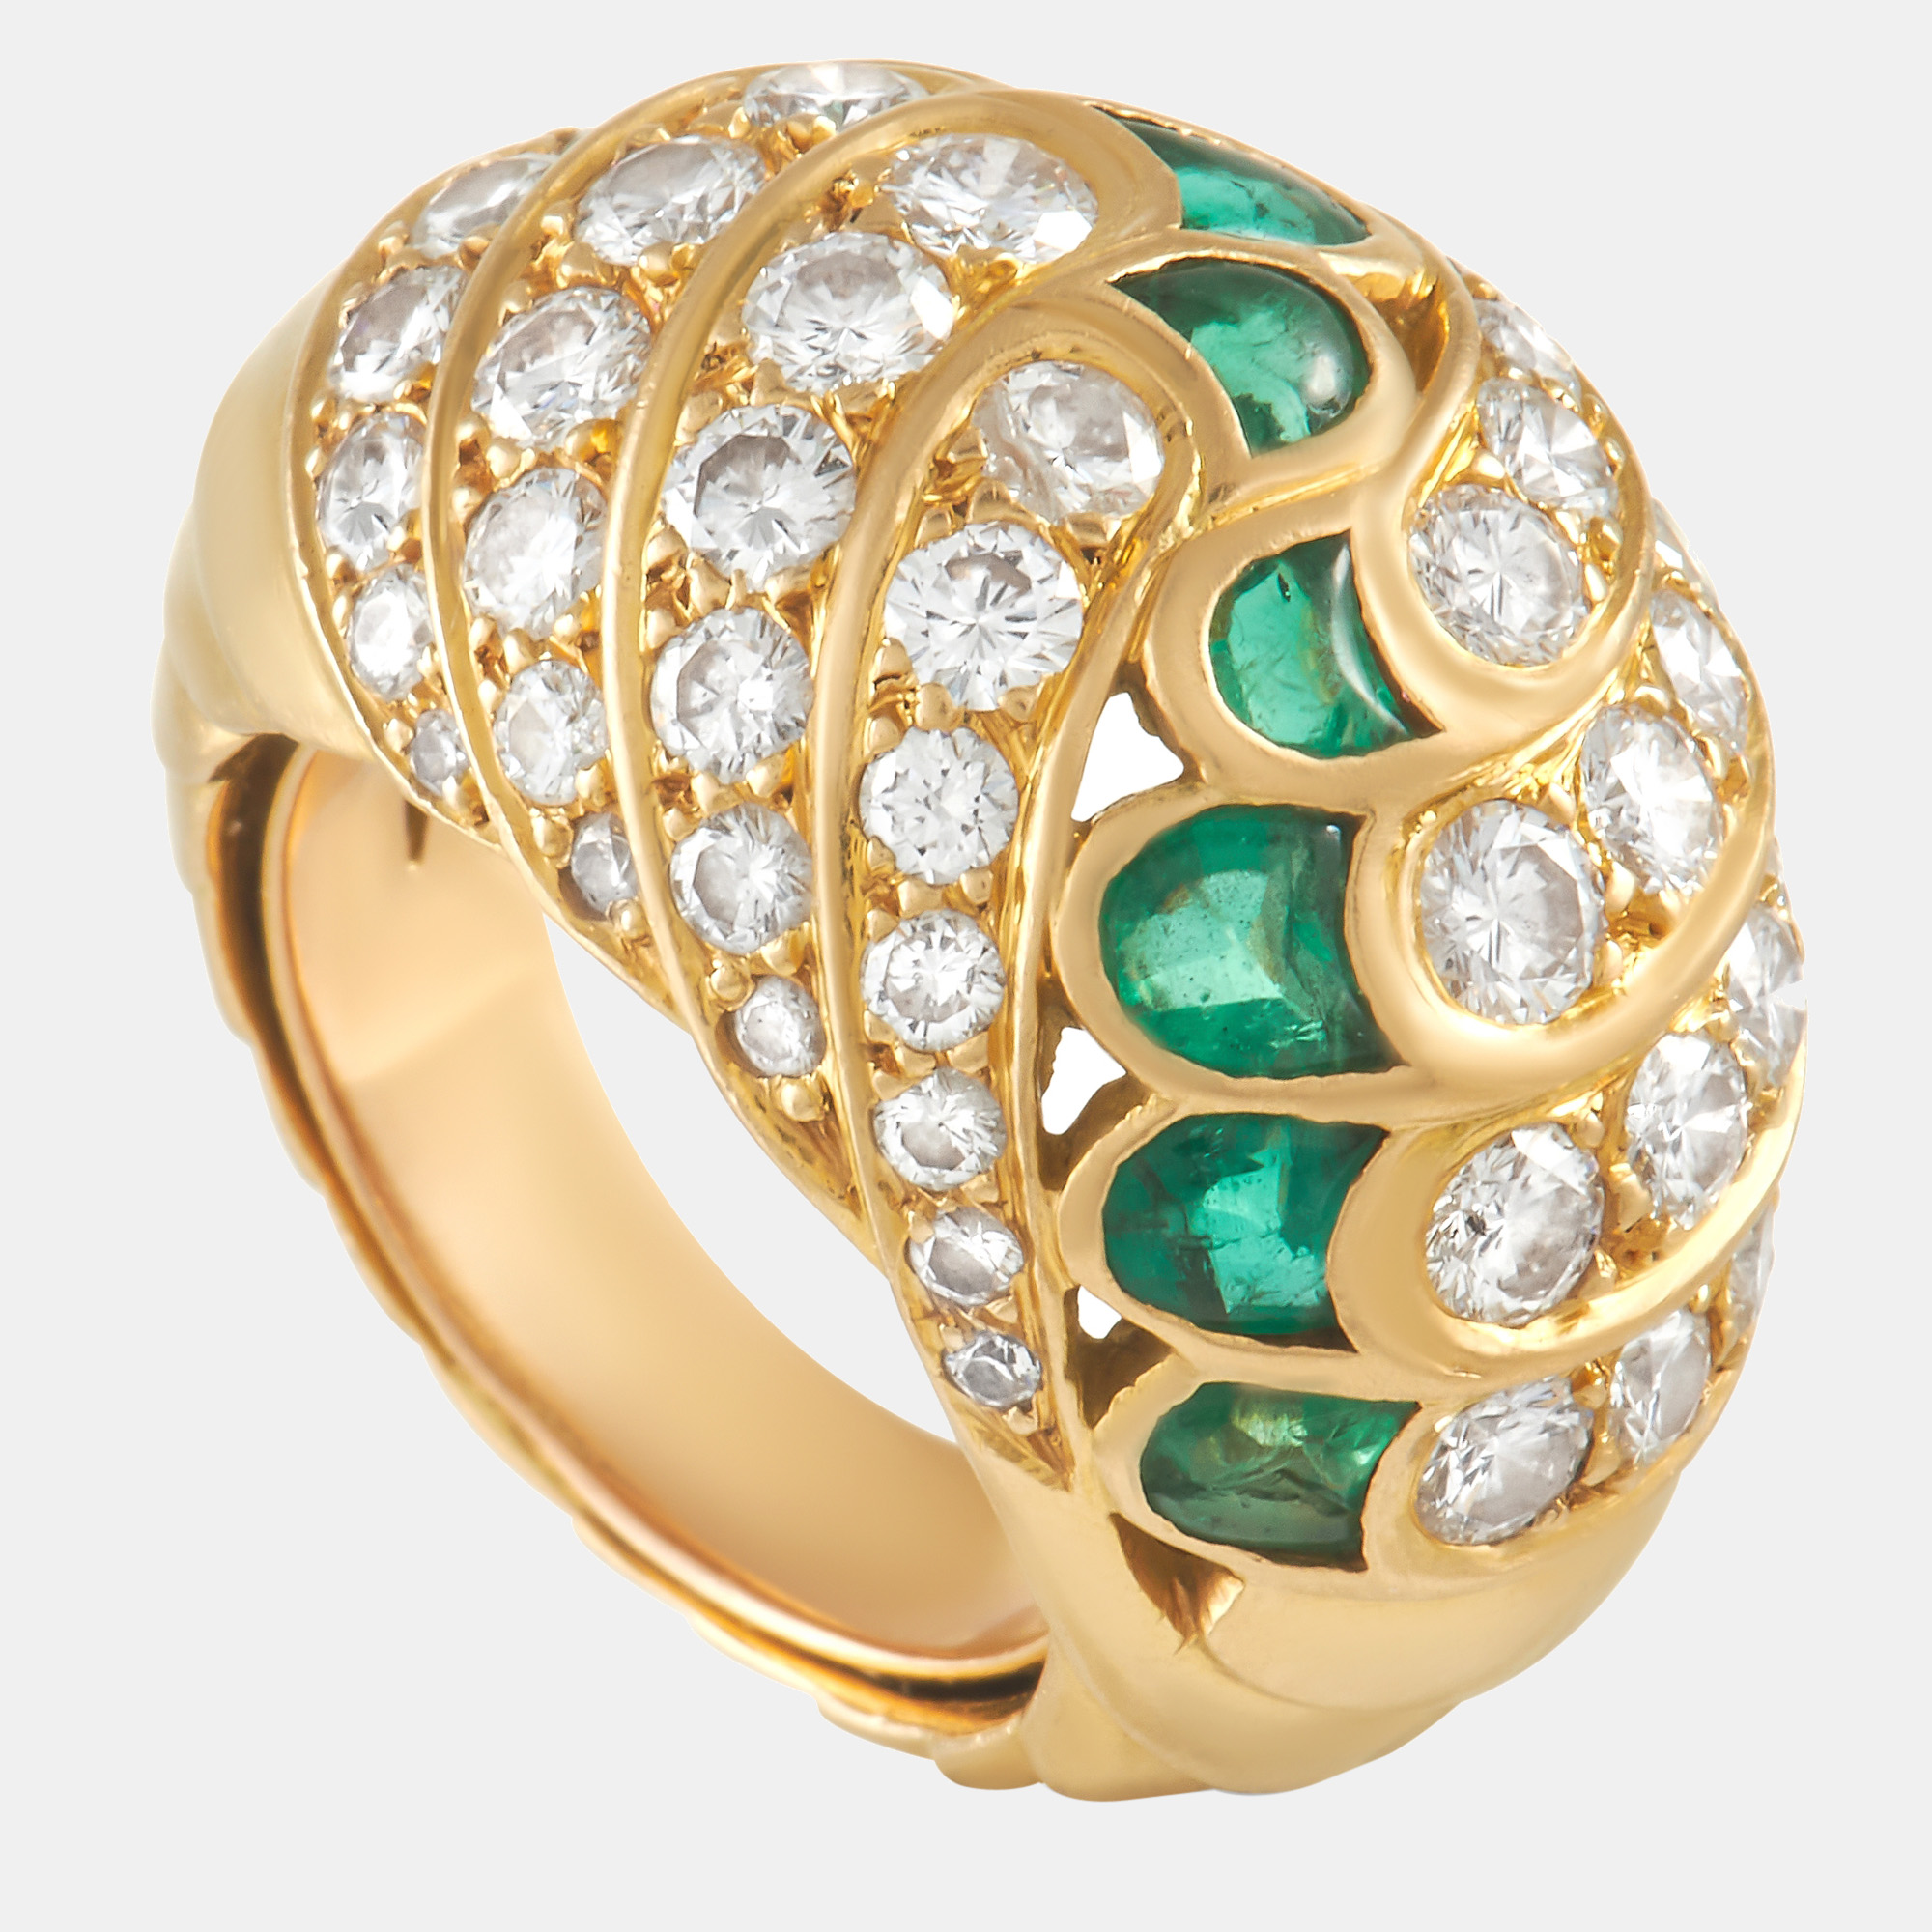 Piaget 18k yellow gold 2.25 ct diamond and emerald ring